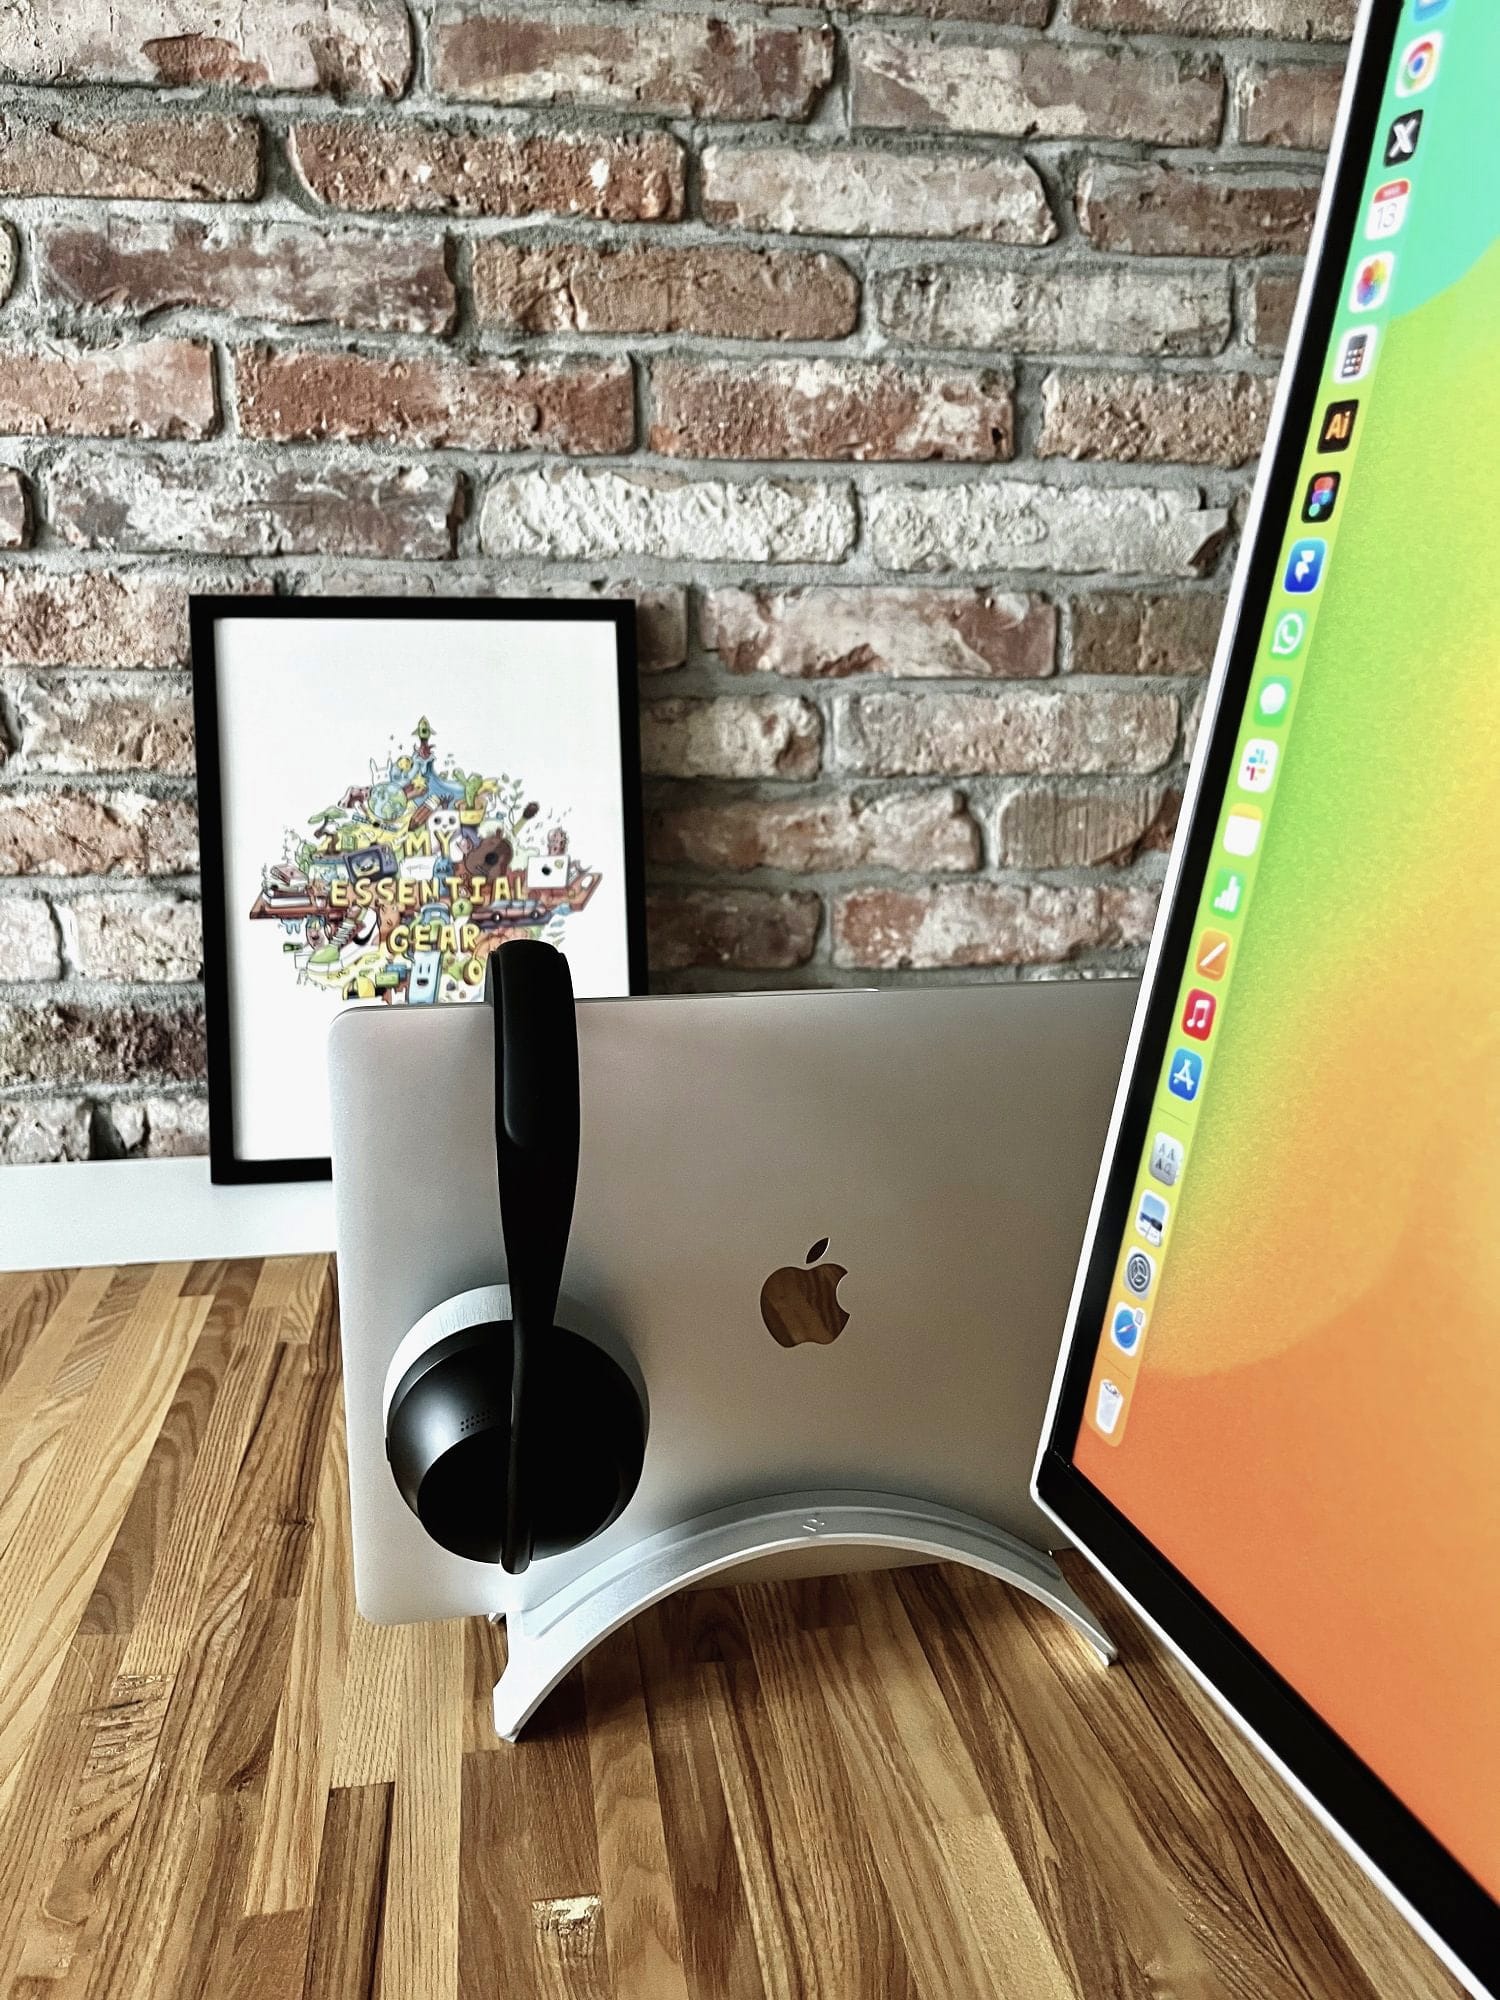 A corner of the modern desk setup with a monitor, a MacBook on a stand, headphones, framed poster, and exposed brick wall